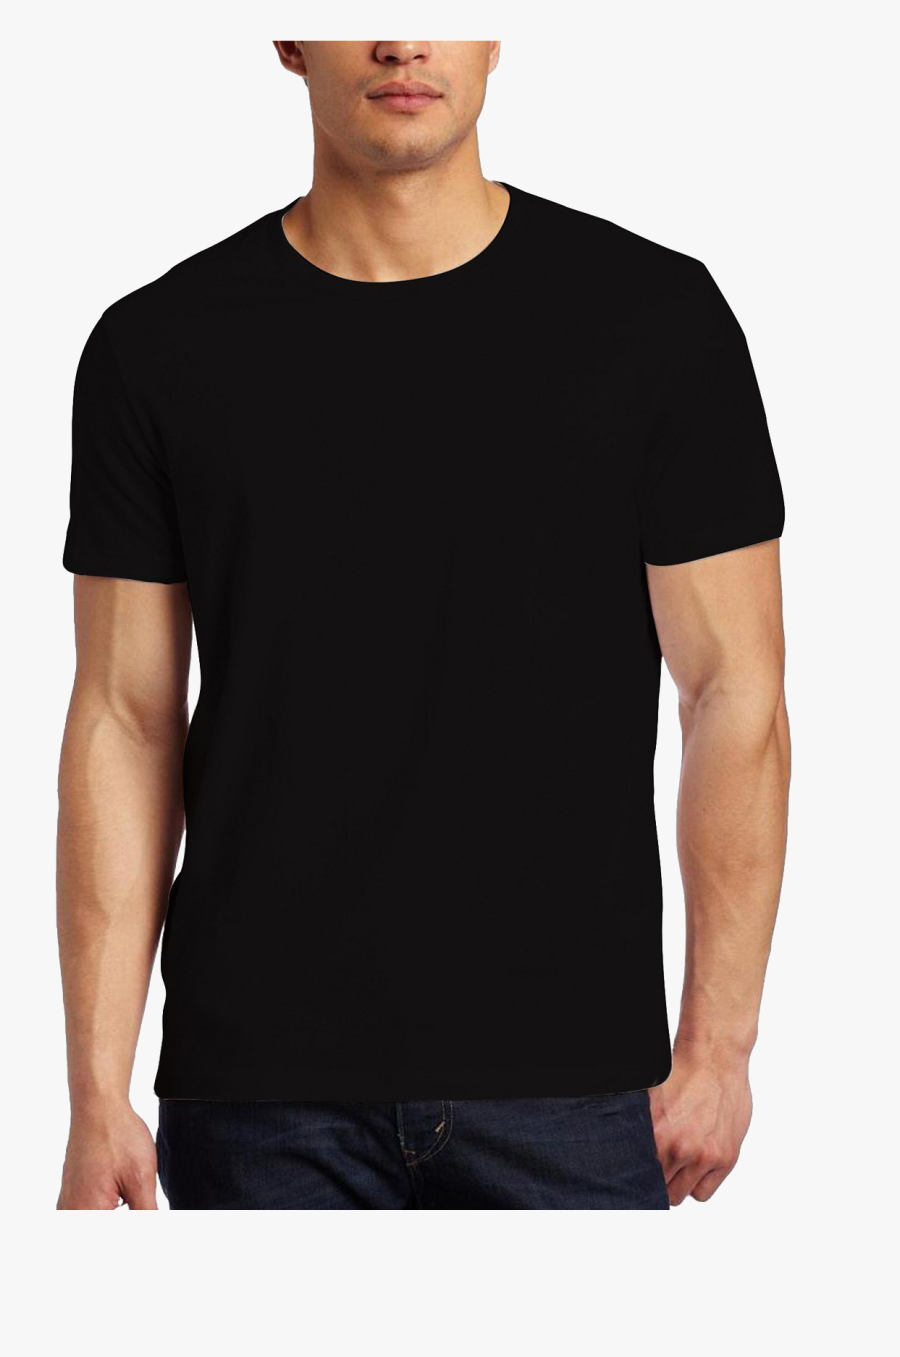 Download Black T-shirt Png Image Background - Real Black T Shirt Template , Free Transparent Clipart ...